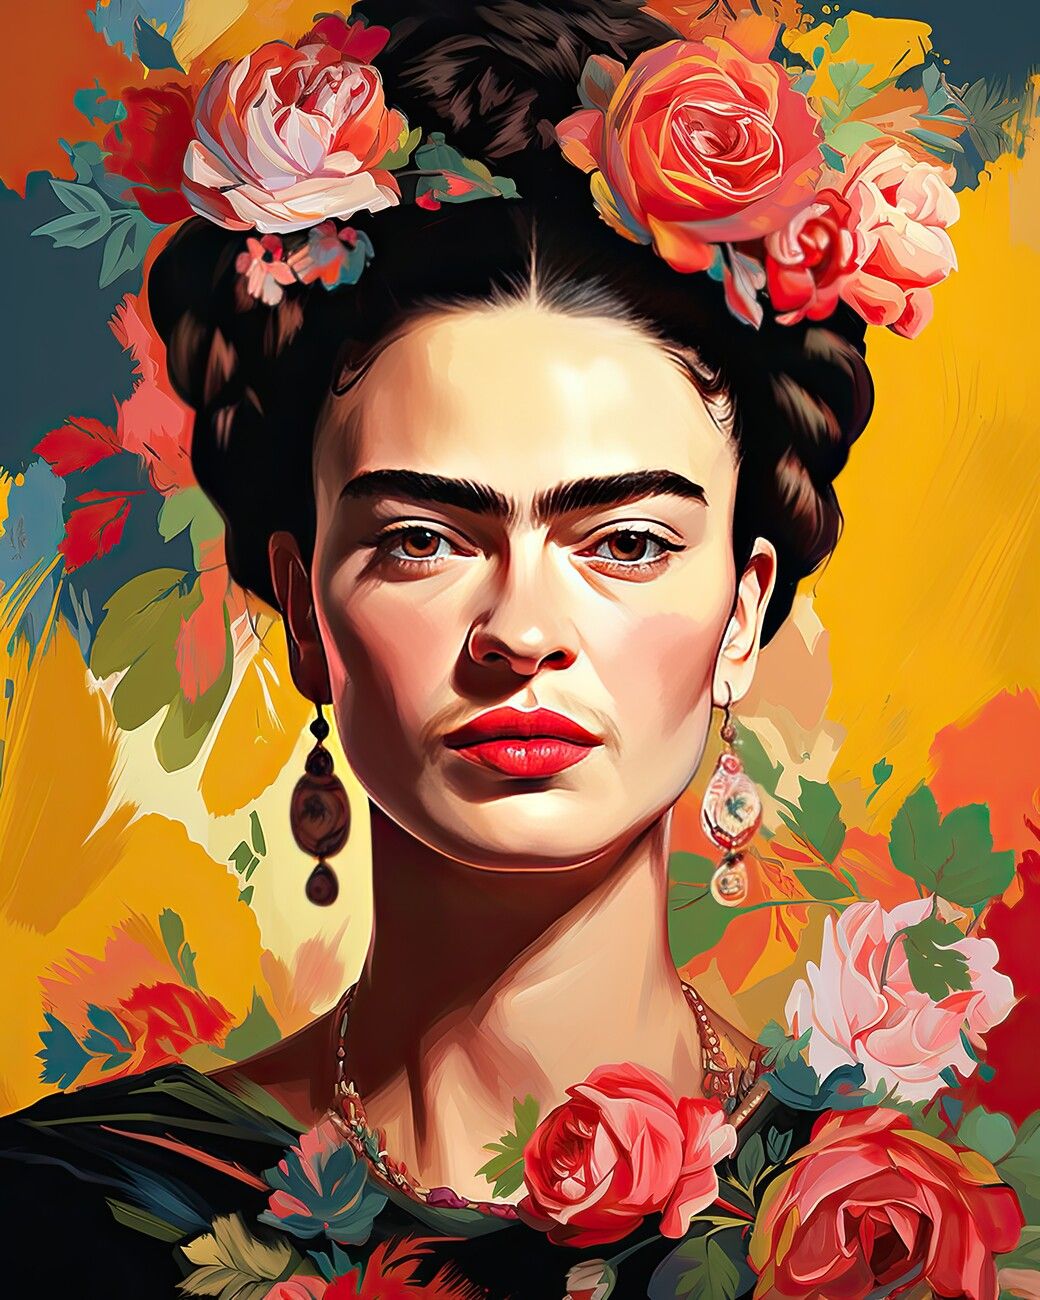 A portrait of Frida Kahlo with flowers in her hair and a floral background. - Frida Kahlo